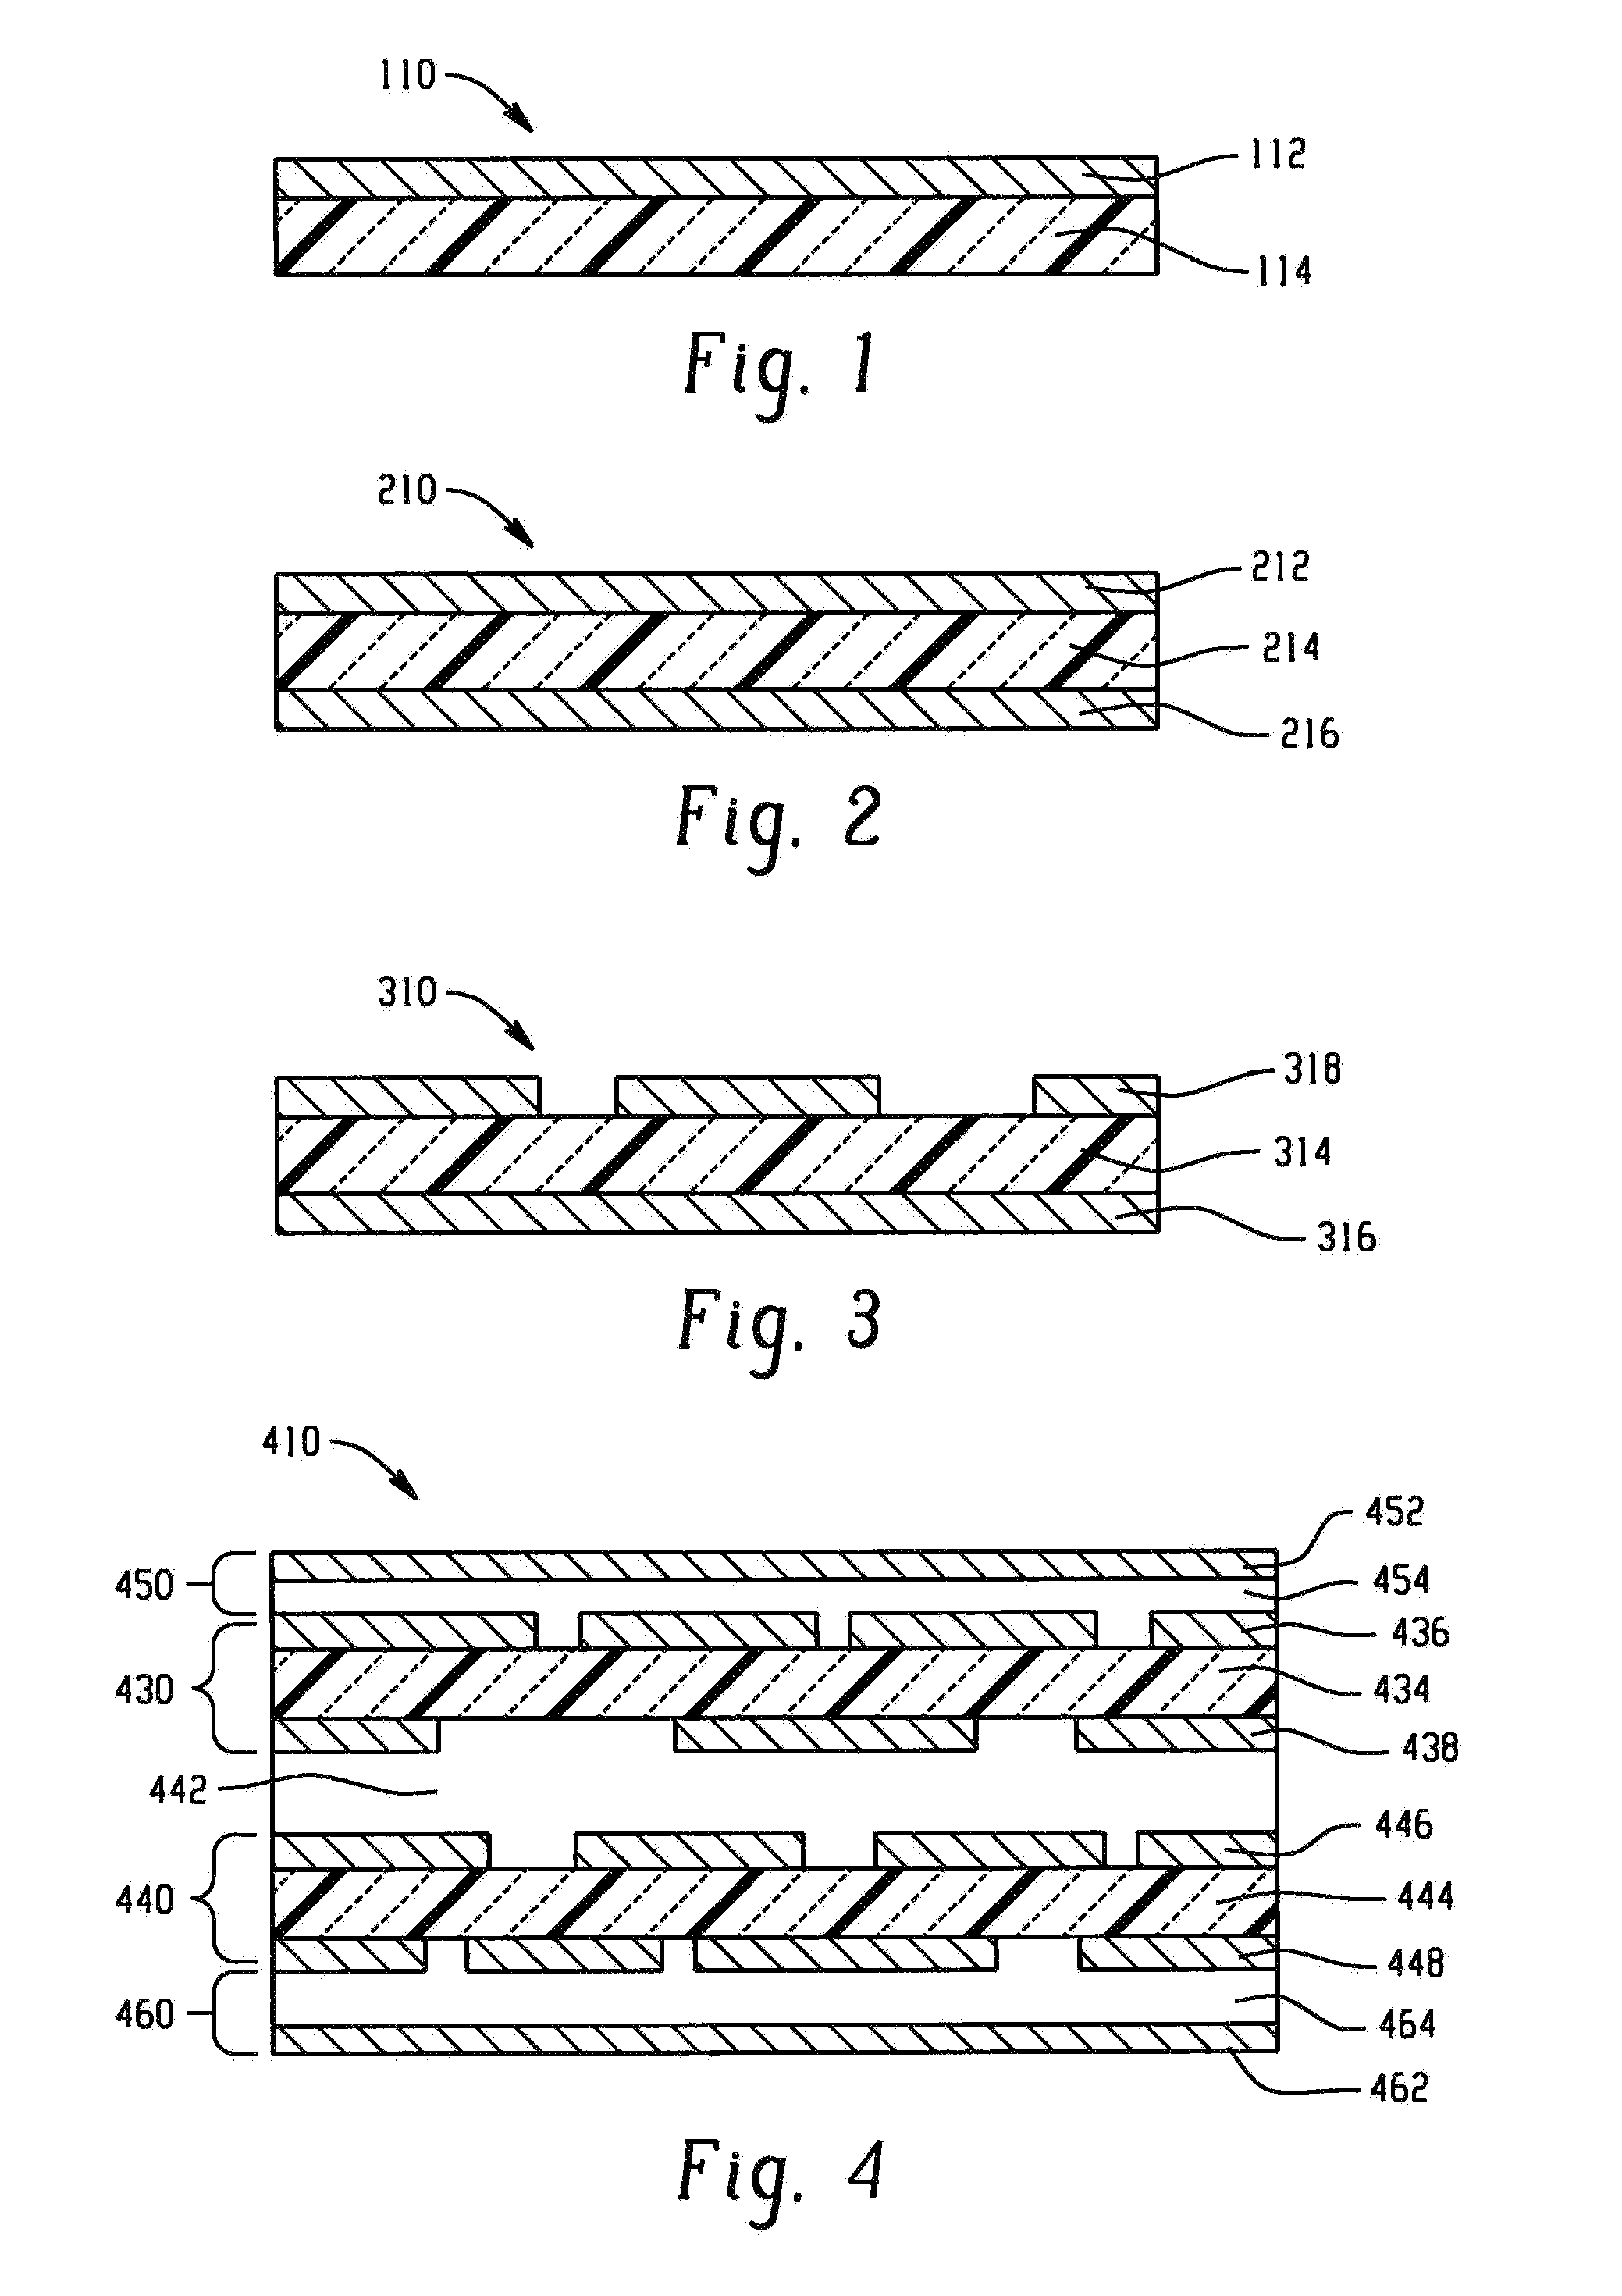 Circuit materials, circuits laminates, and method of manufacture thereof